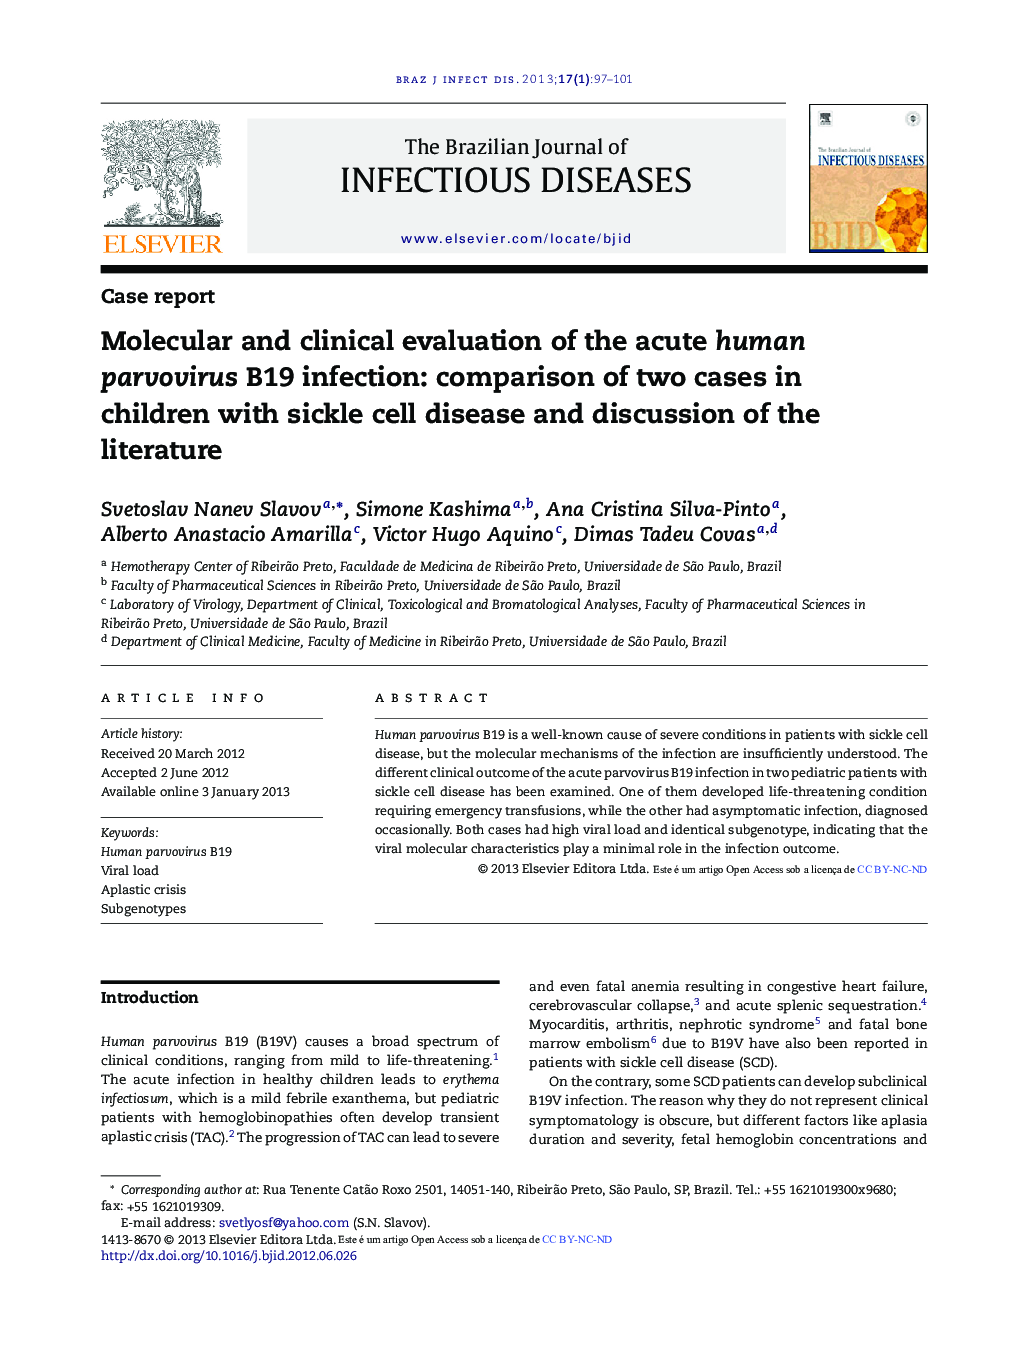 Molecular and clinical evaluation of the acute human parvovirus B19 infection: comparison of two cases in children with sickle cell disease and discussion of the literature